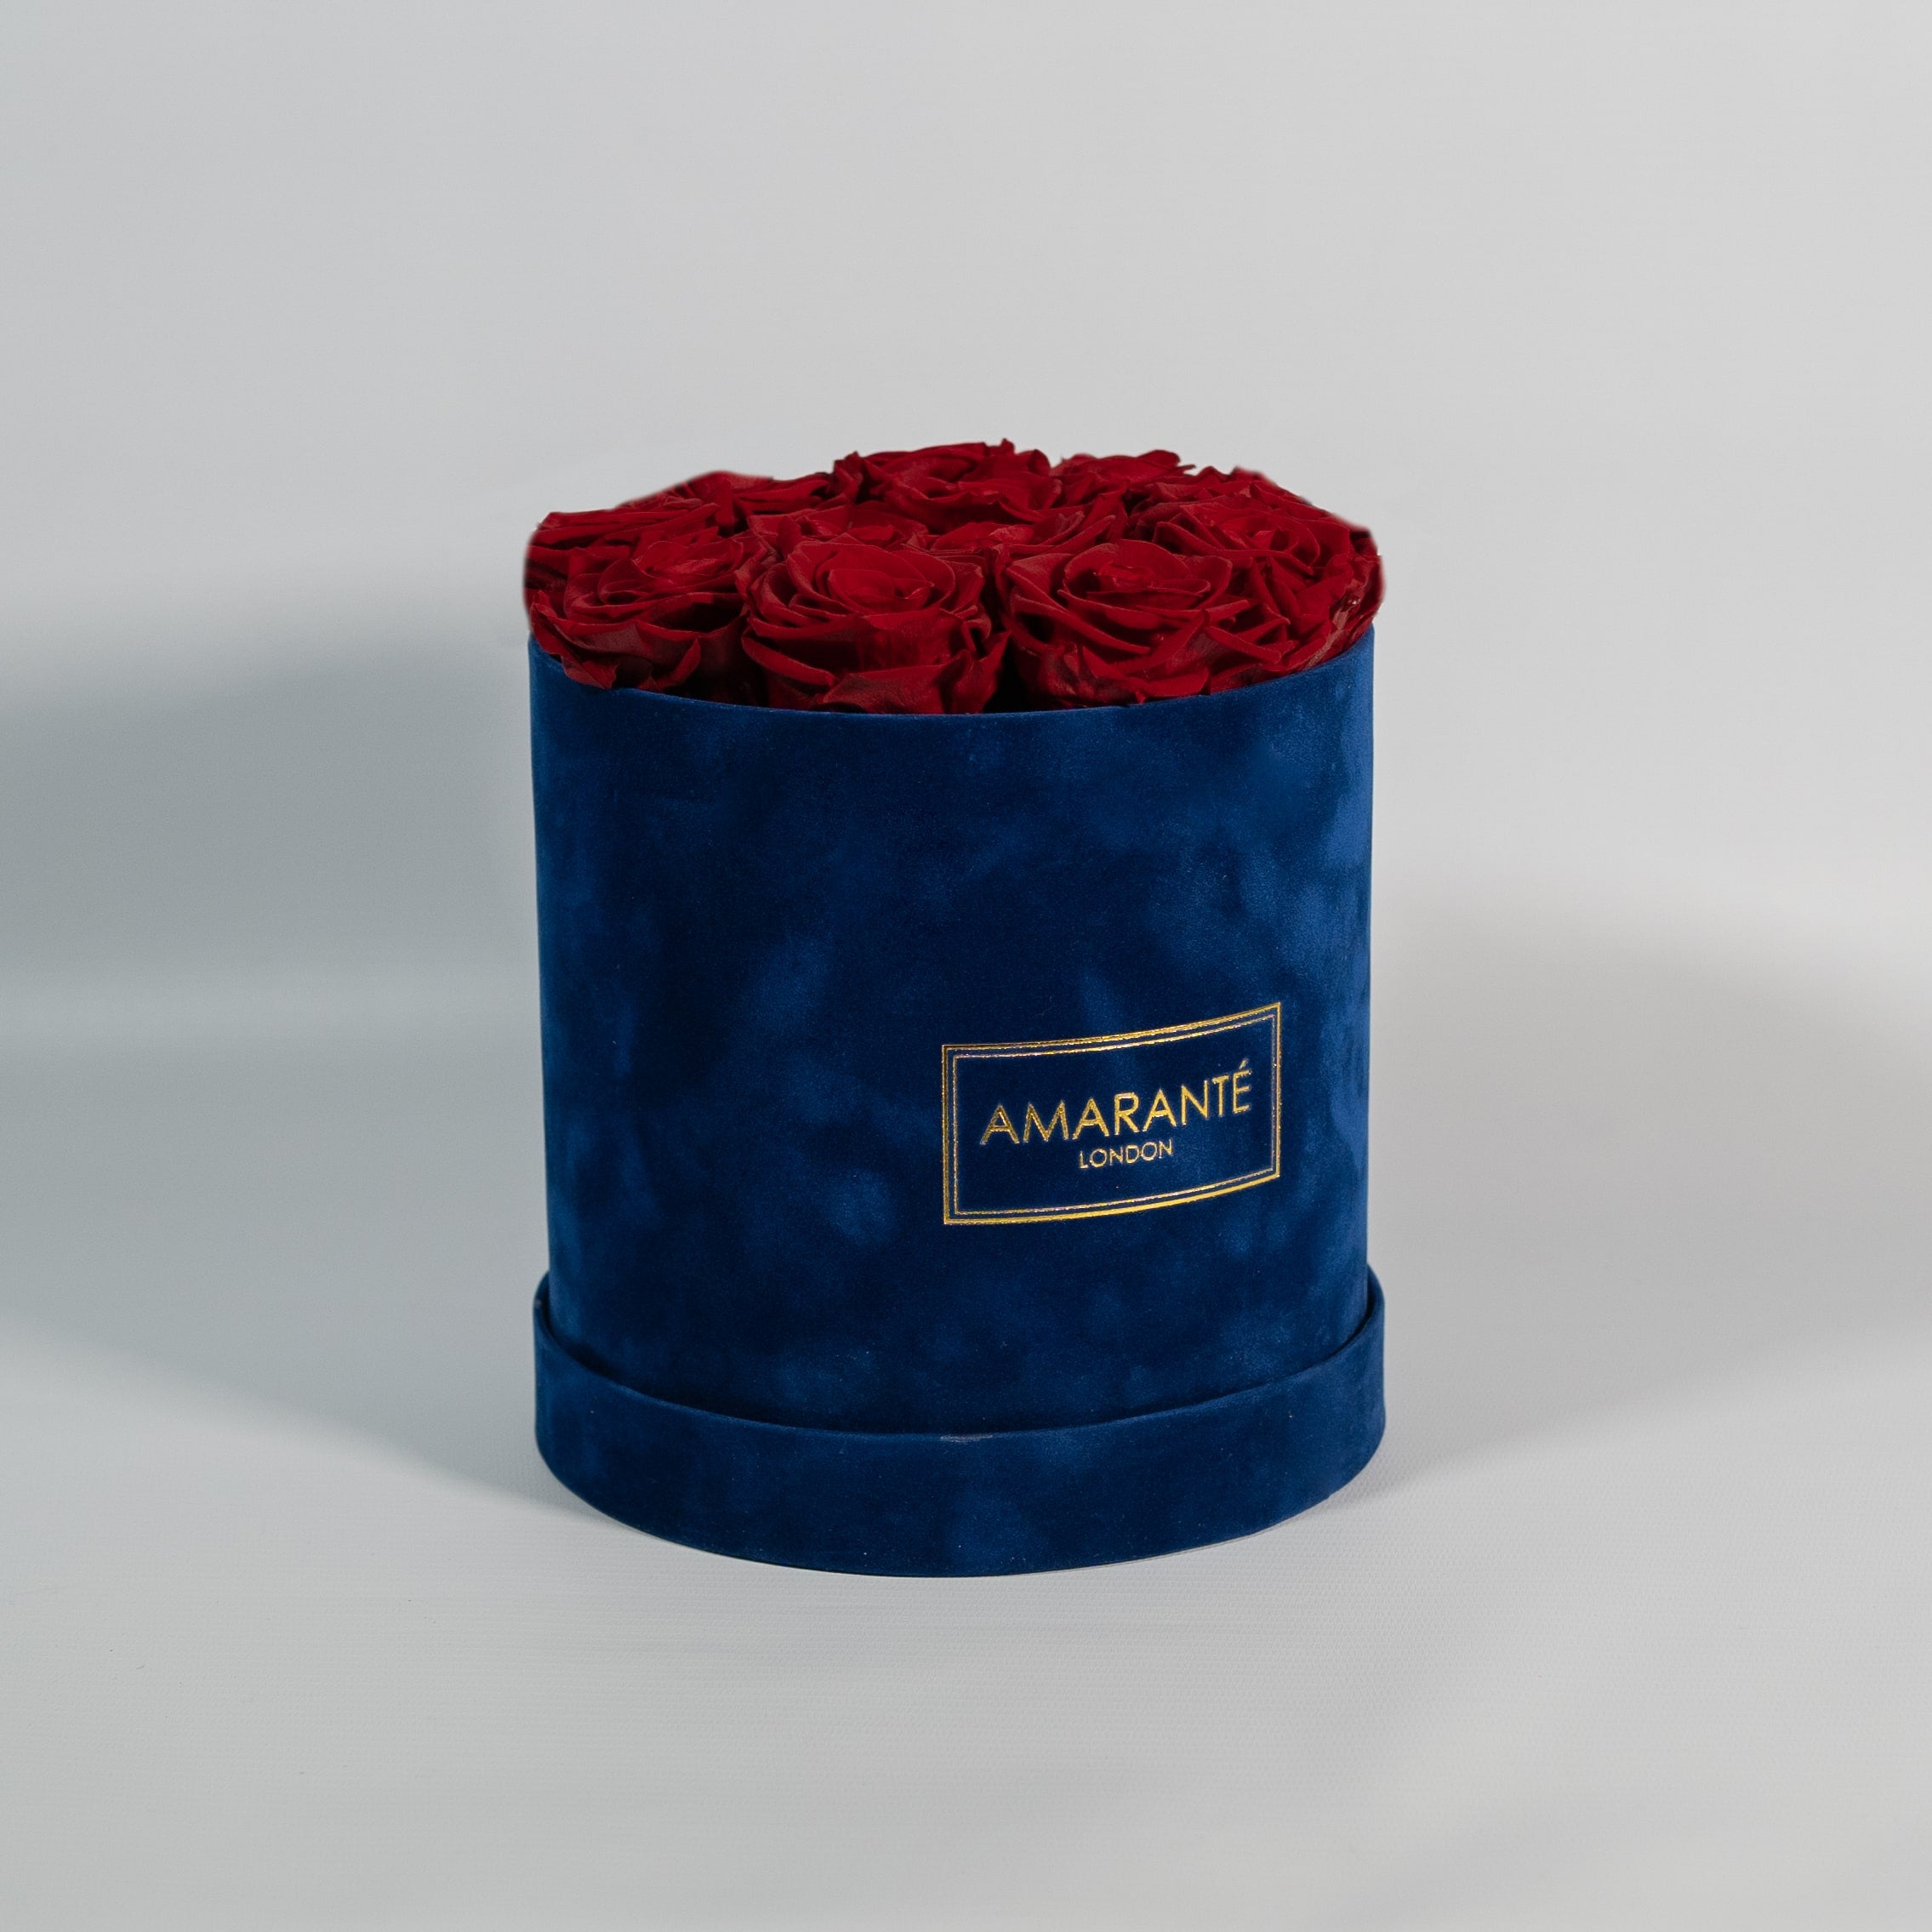 Chic wine red Roses displayed in a modish blue box 